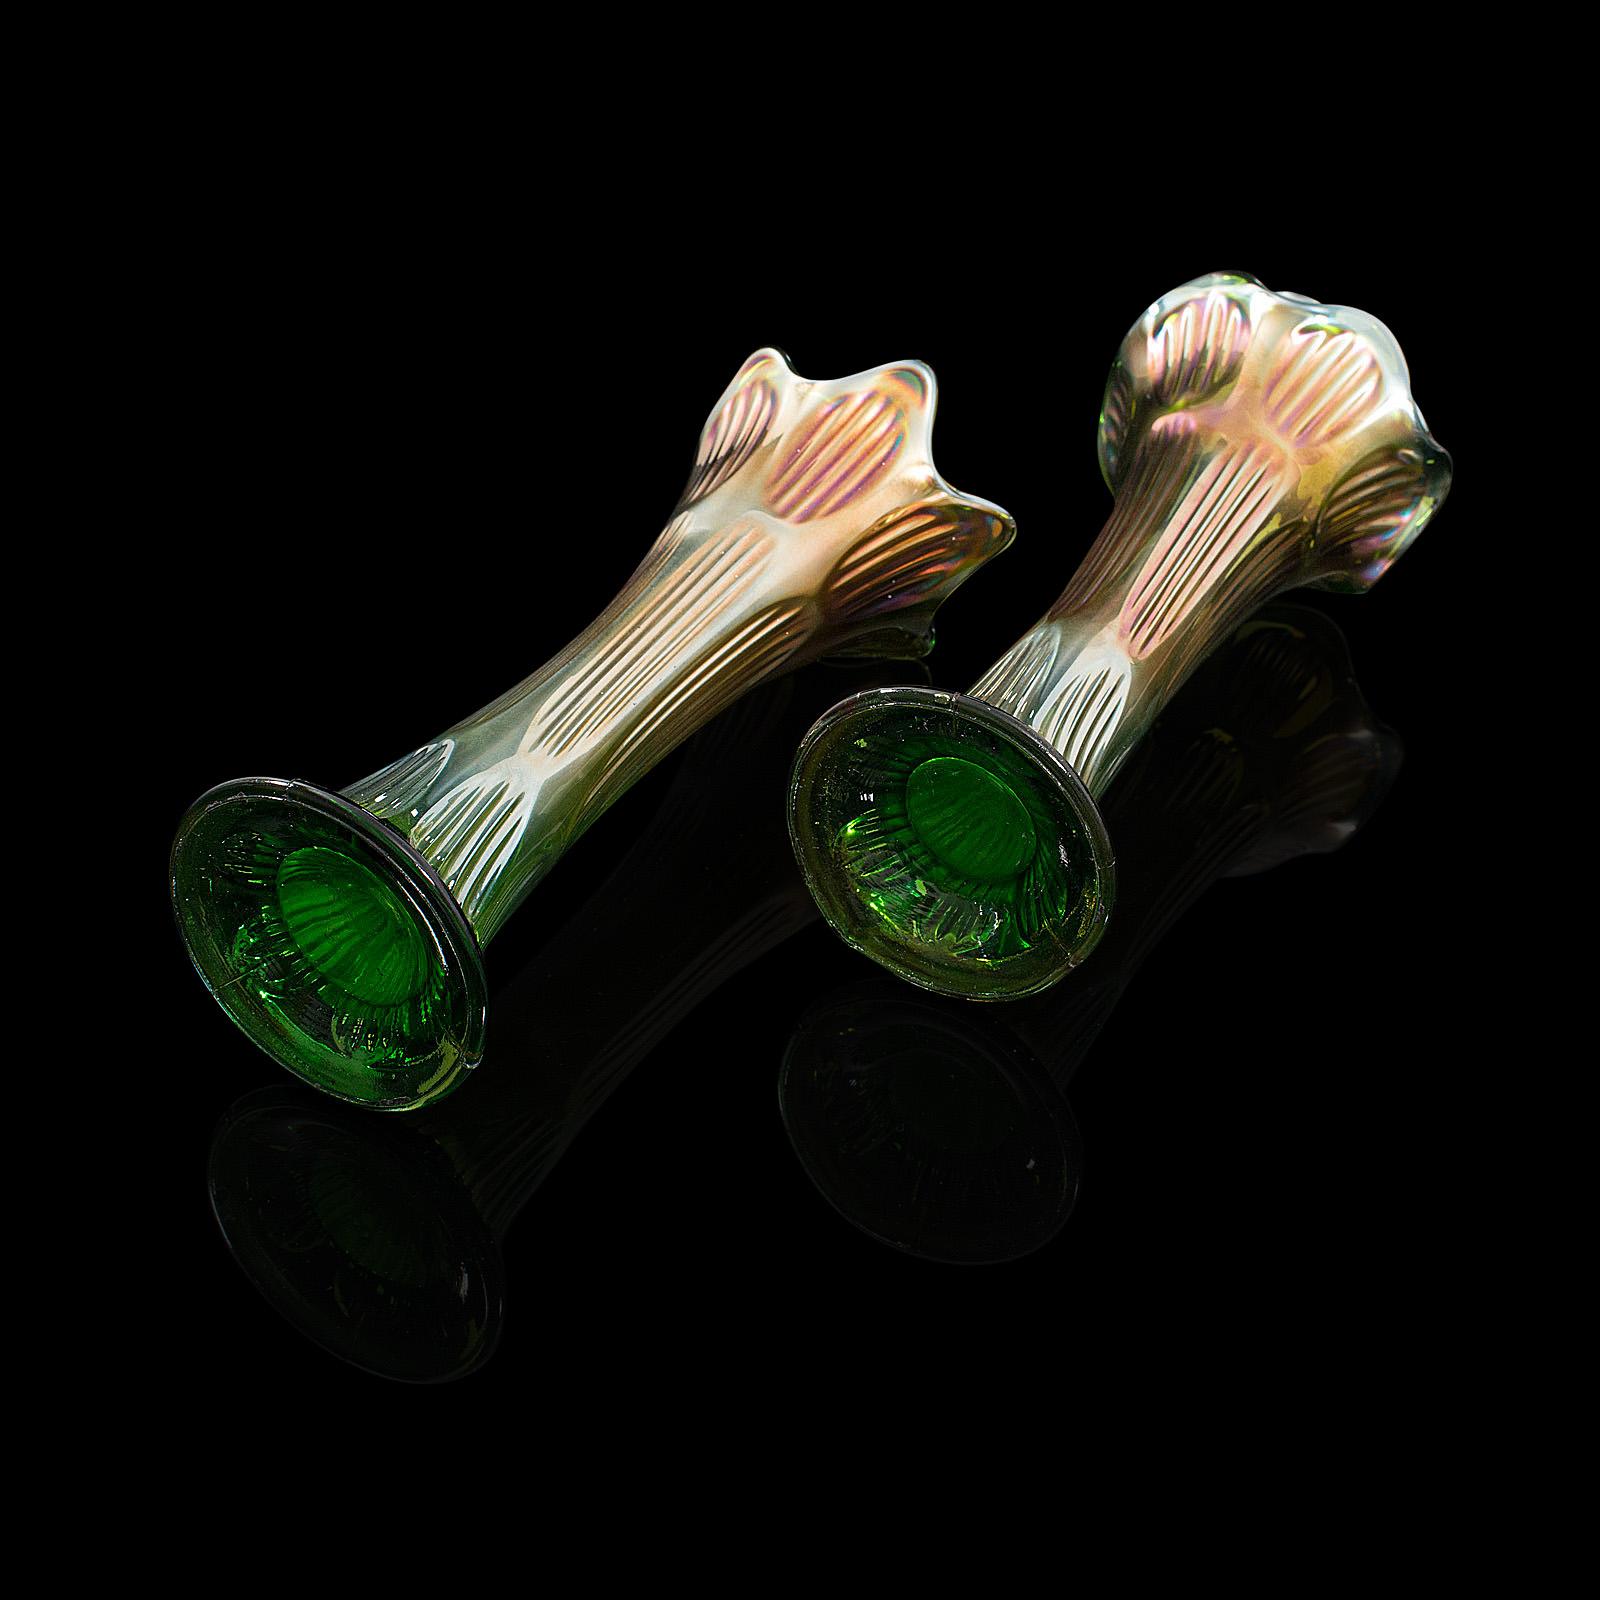 Pair of Vintage Decorative Flower Vases, English, Carnival Glass, circa 1930 For Sale 2